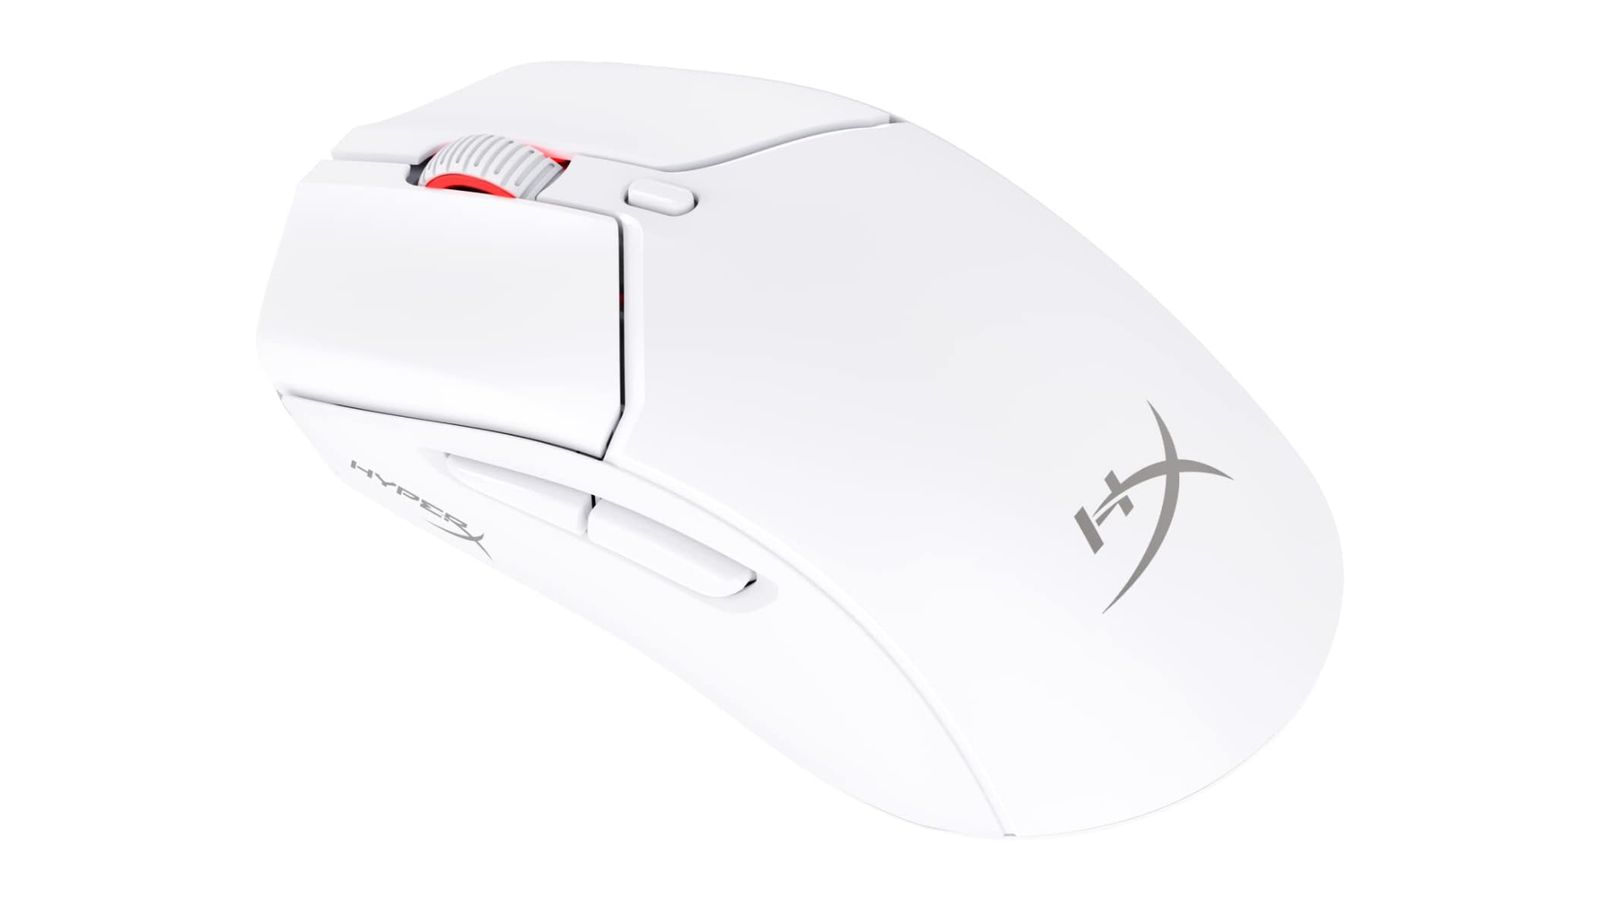 HyperX Pulsefire Haste 2 product image of a white wireless mouse featuring a grey HyperX logo and an orange detail on the scroll wheel.